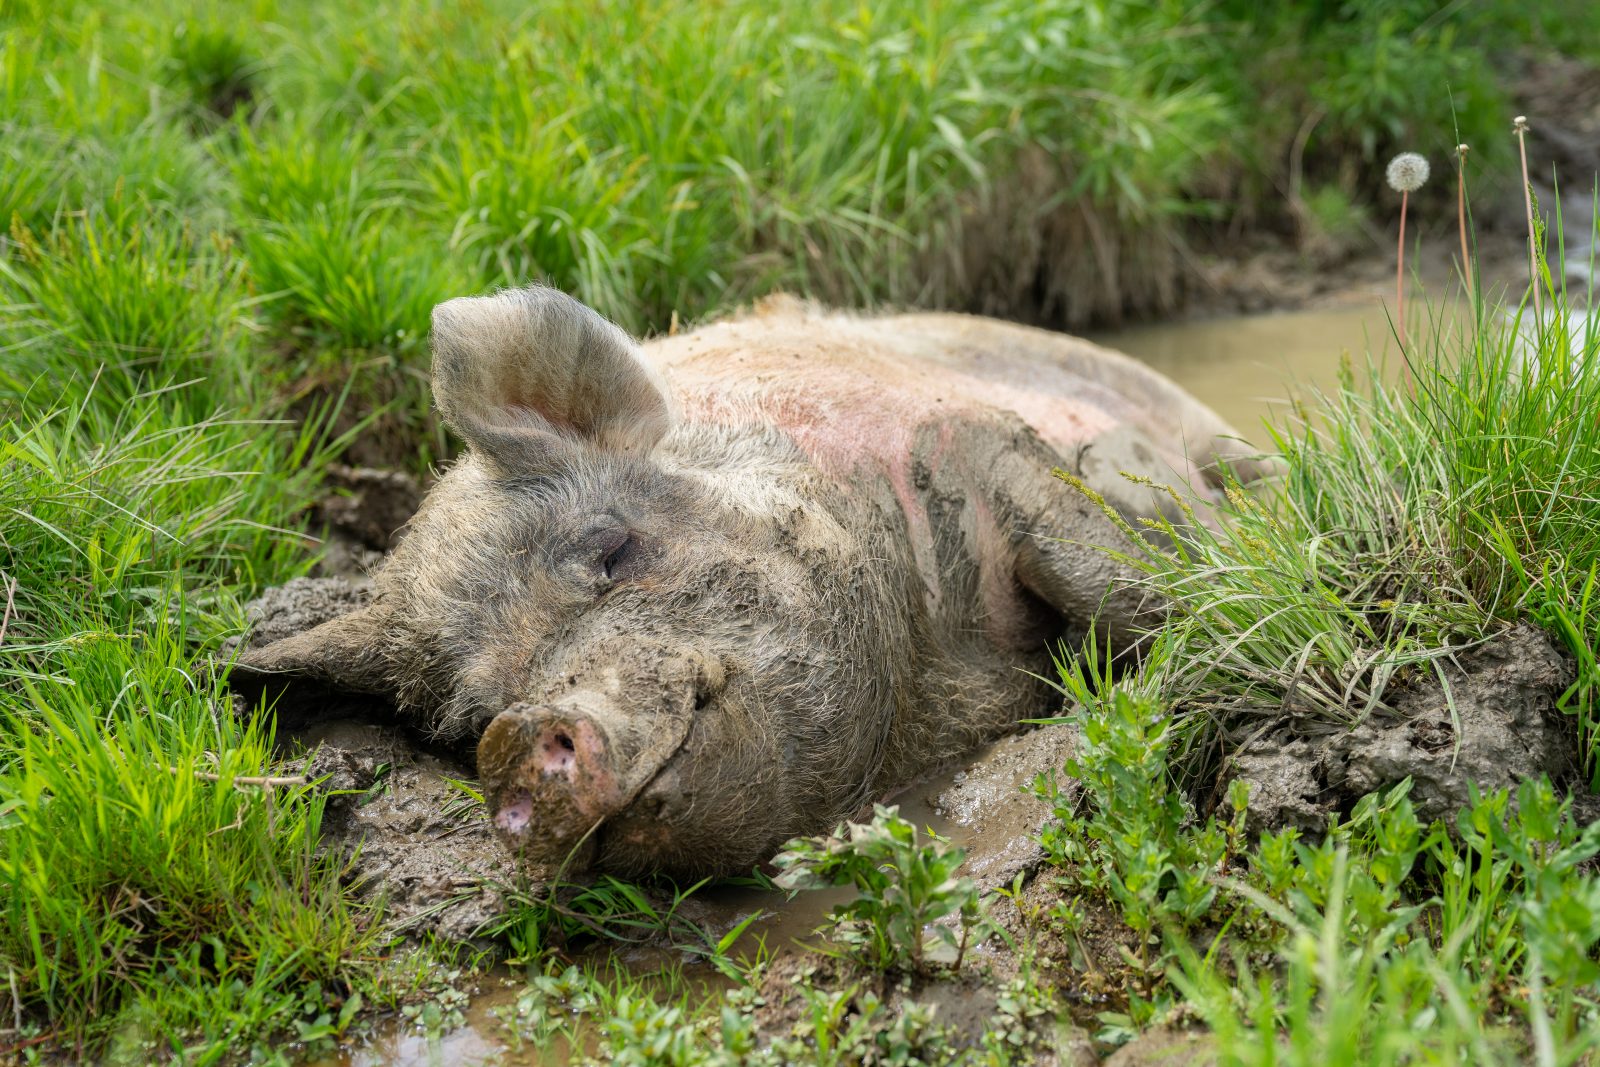 Betty pig soaks in the mud at Farm Sanctuary